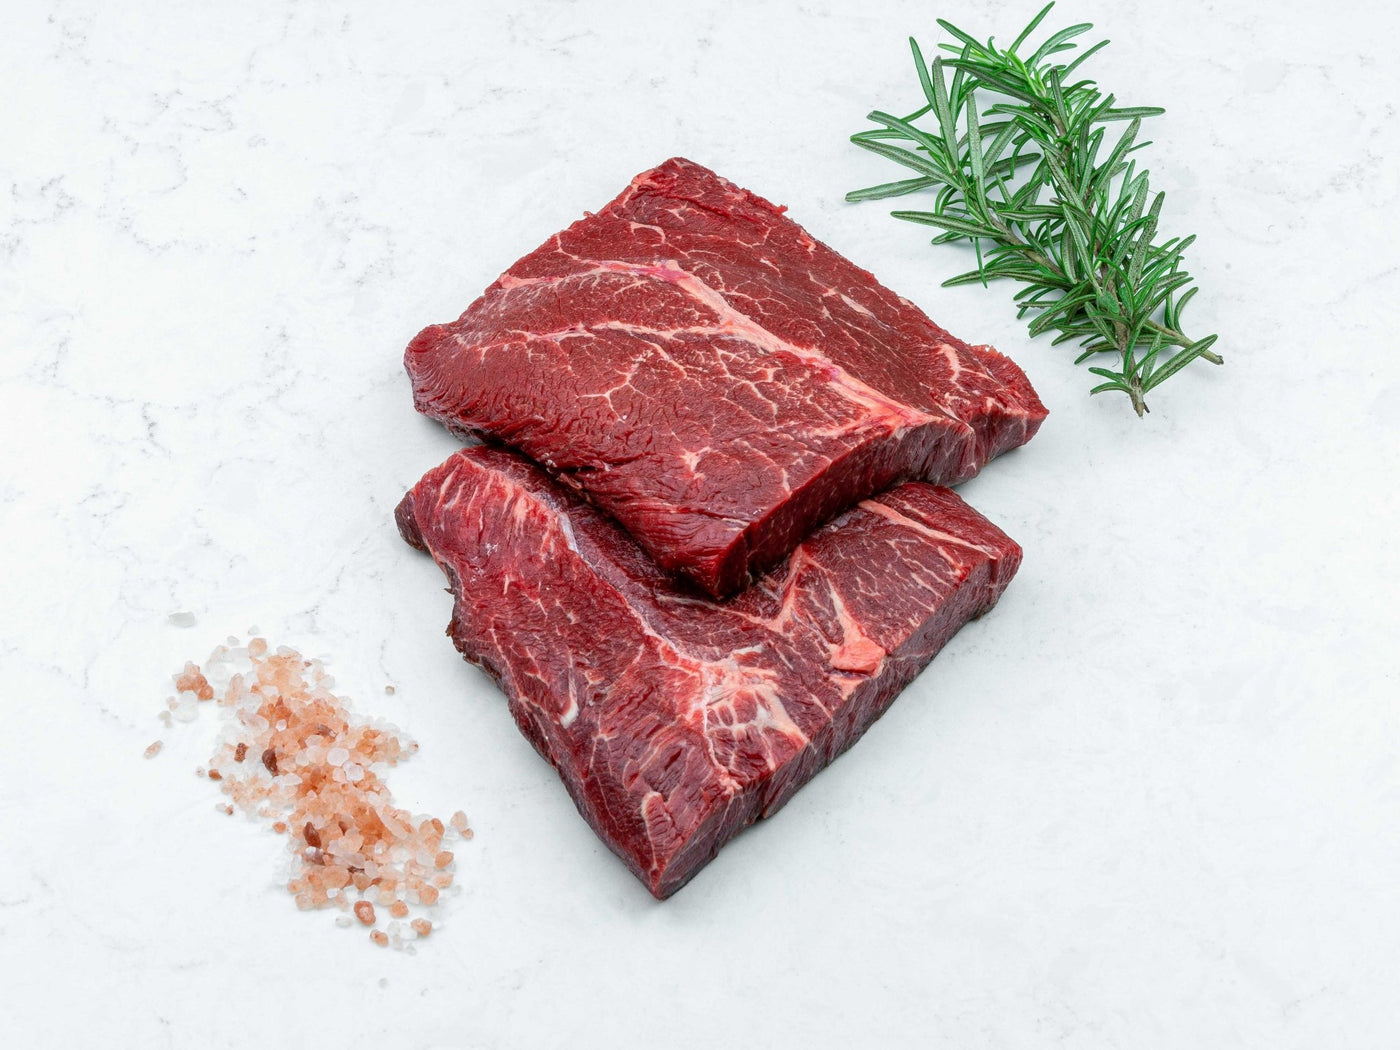 Grass Fed, Dry-Aged Flat Iron Steak - Beef - Thomas Joseph Butchery - Ethical Dry-Aged Meat The Best Steak UK Thomas Joseph Butchery